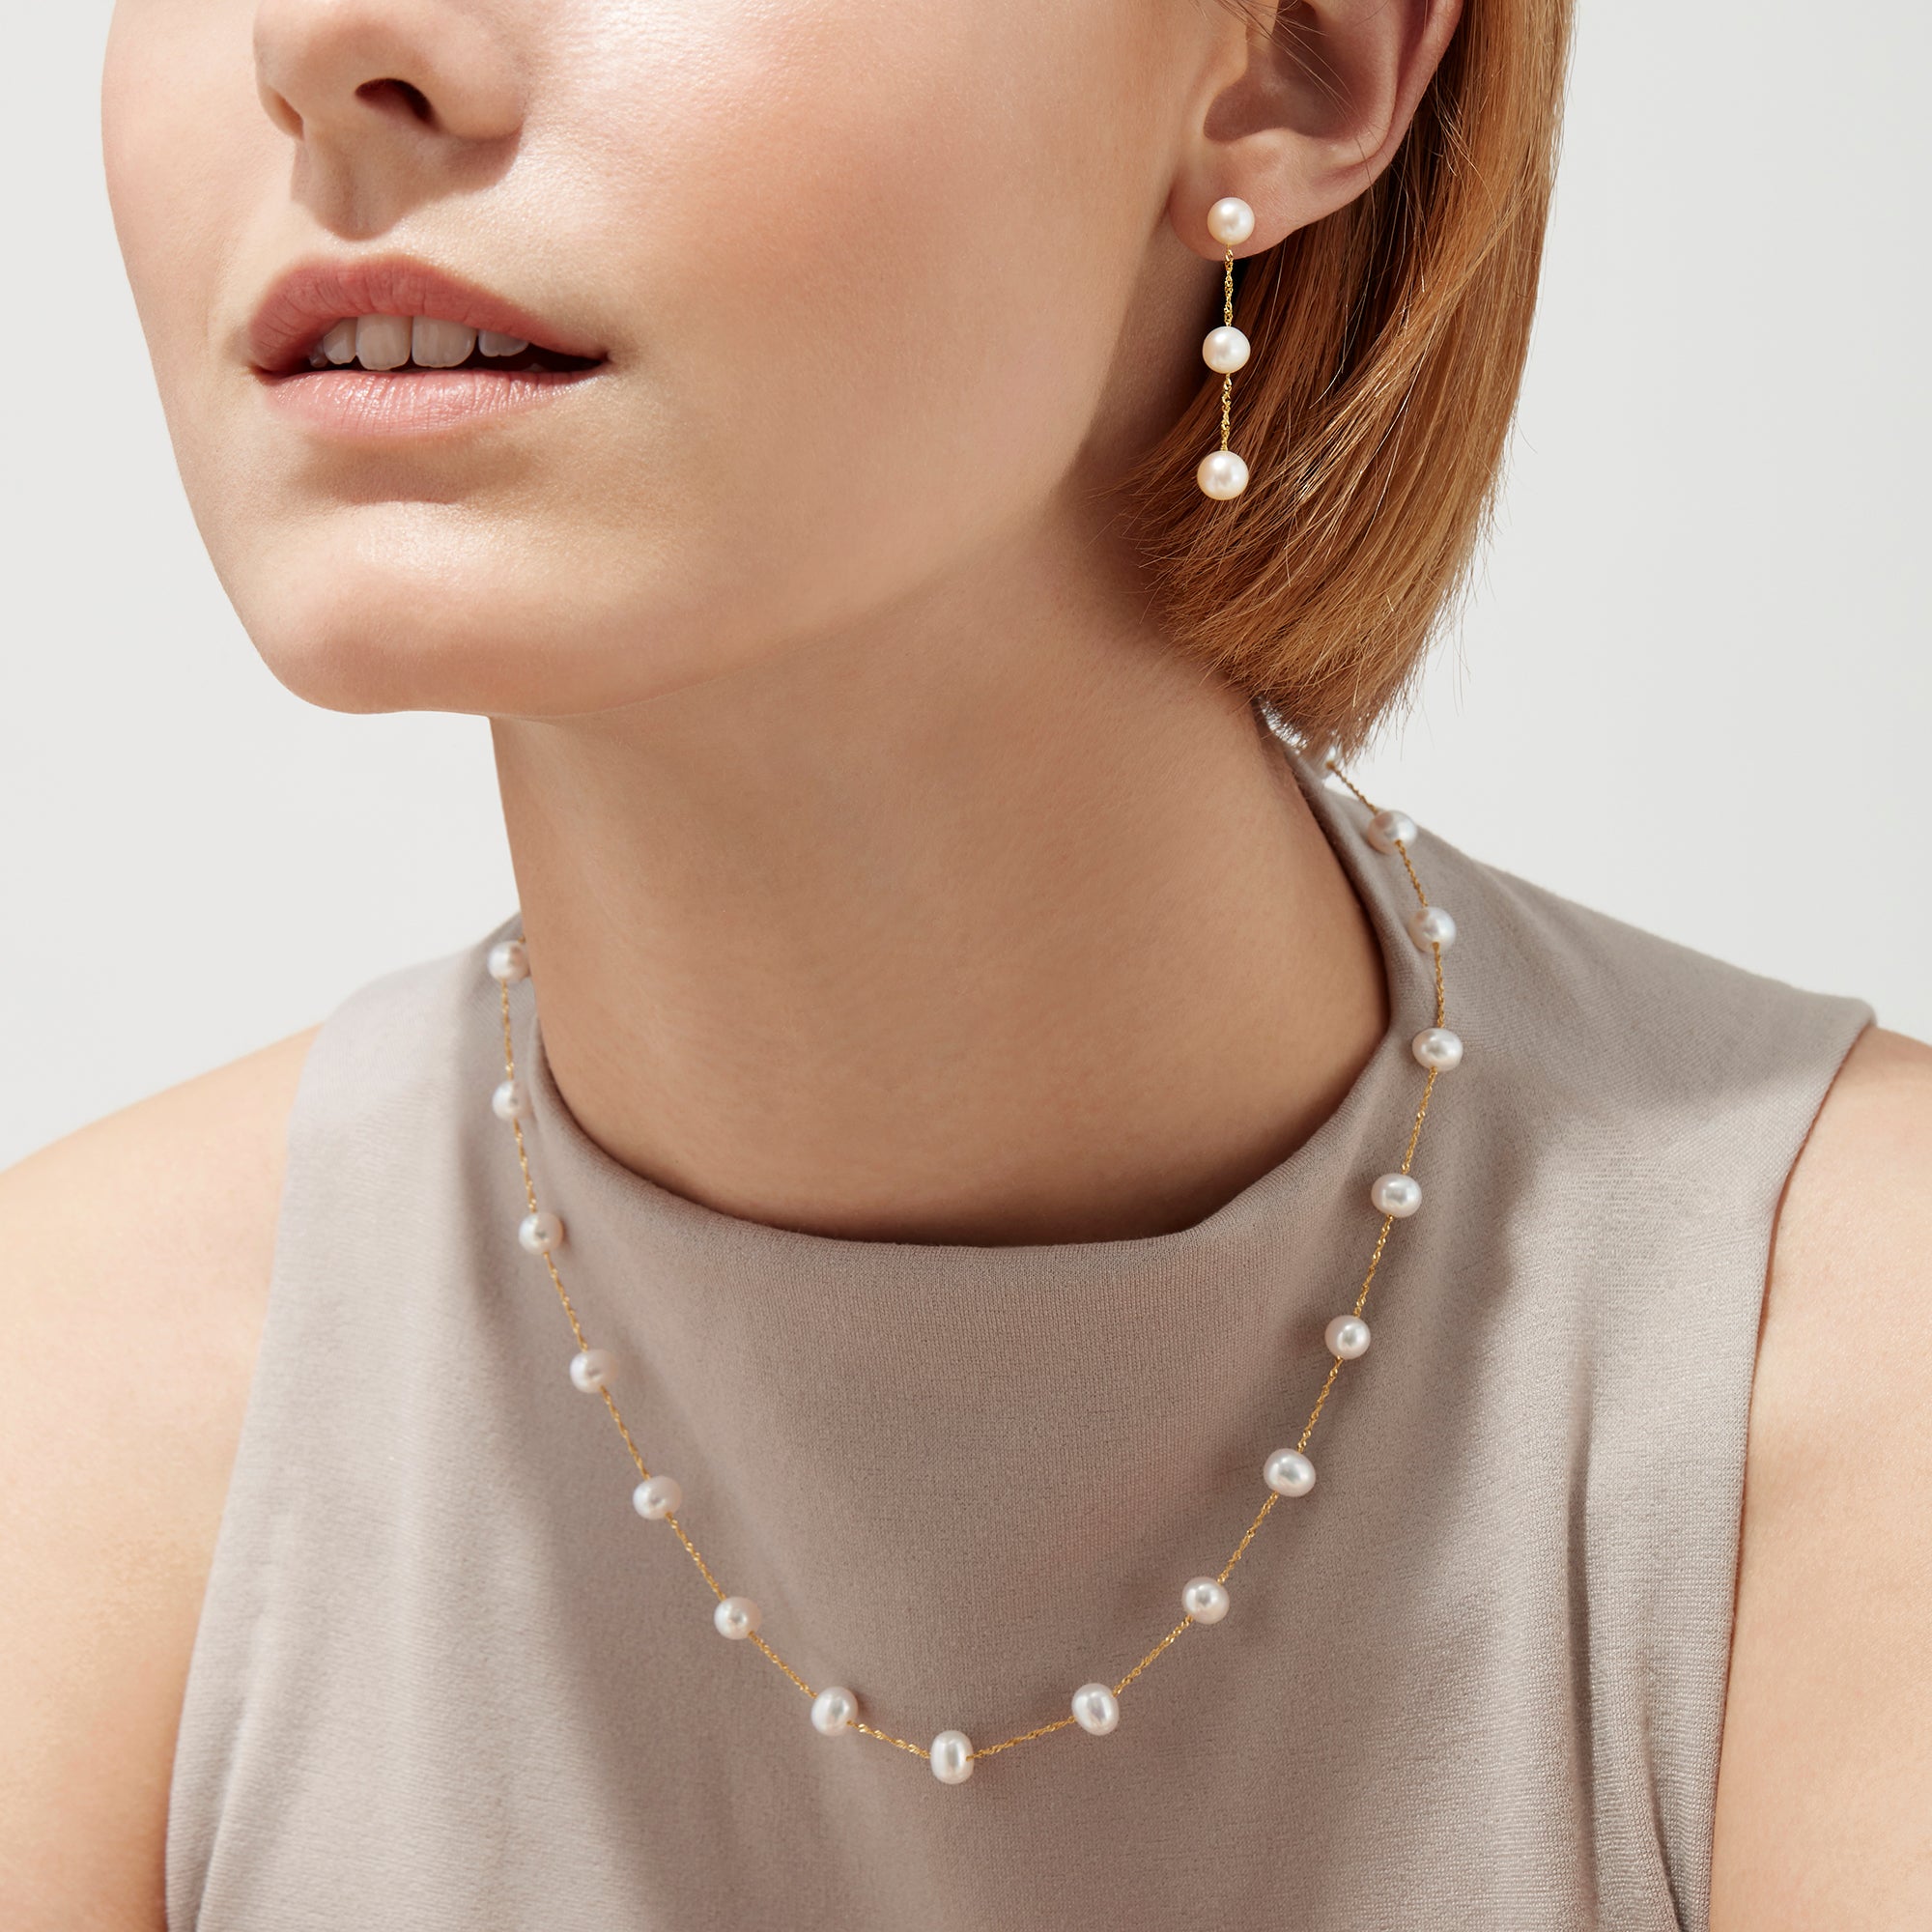 AZALIA FRESHWATER PEARL NECKLACE - The Littl A$174.99 A$184.99 14k Yellow  Gold Bridal (Jewellery Only) Chokers